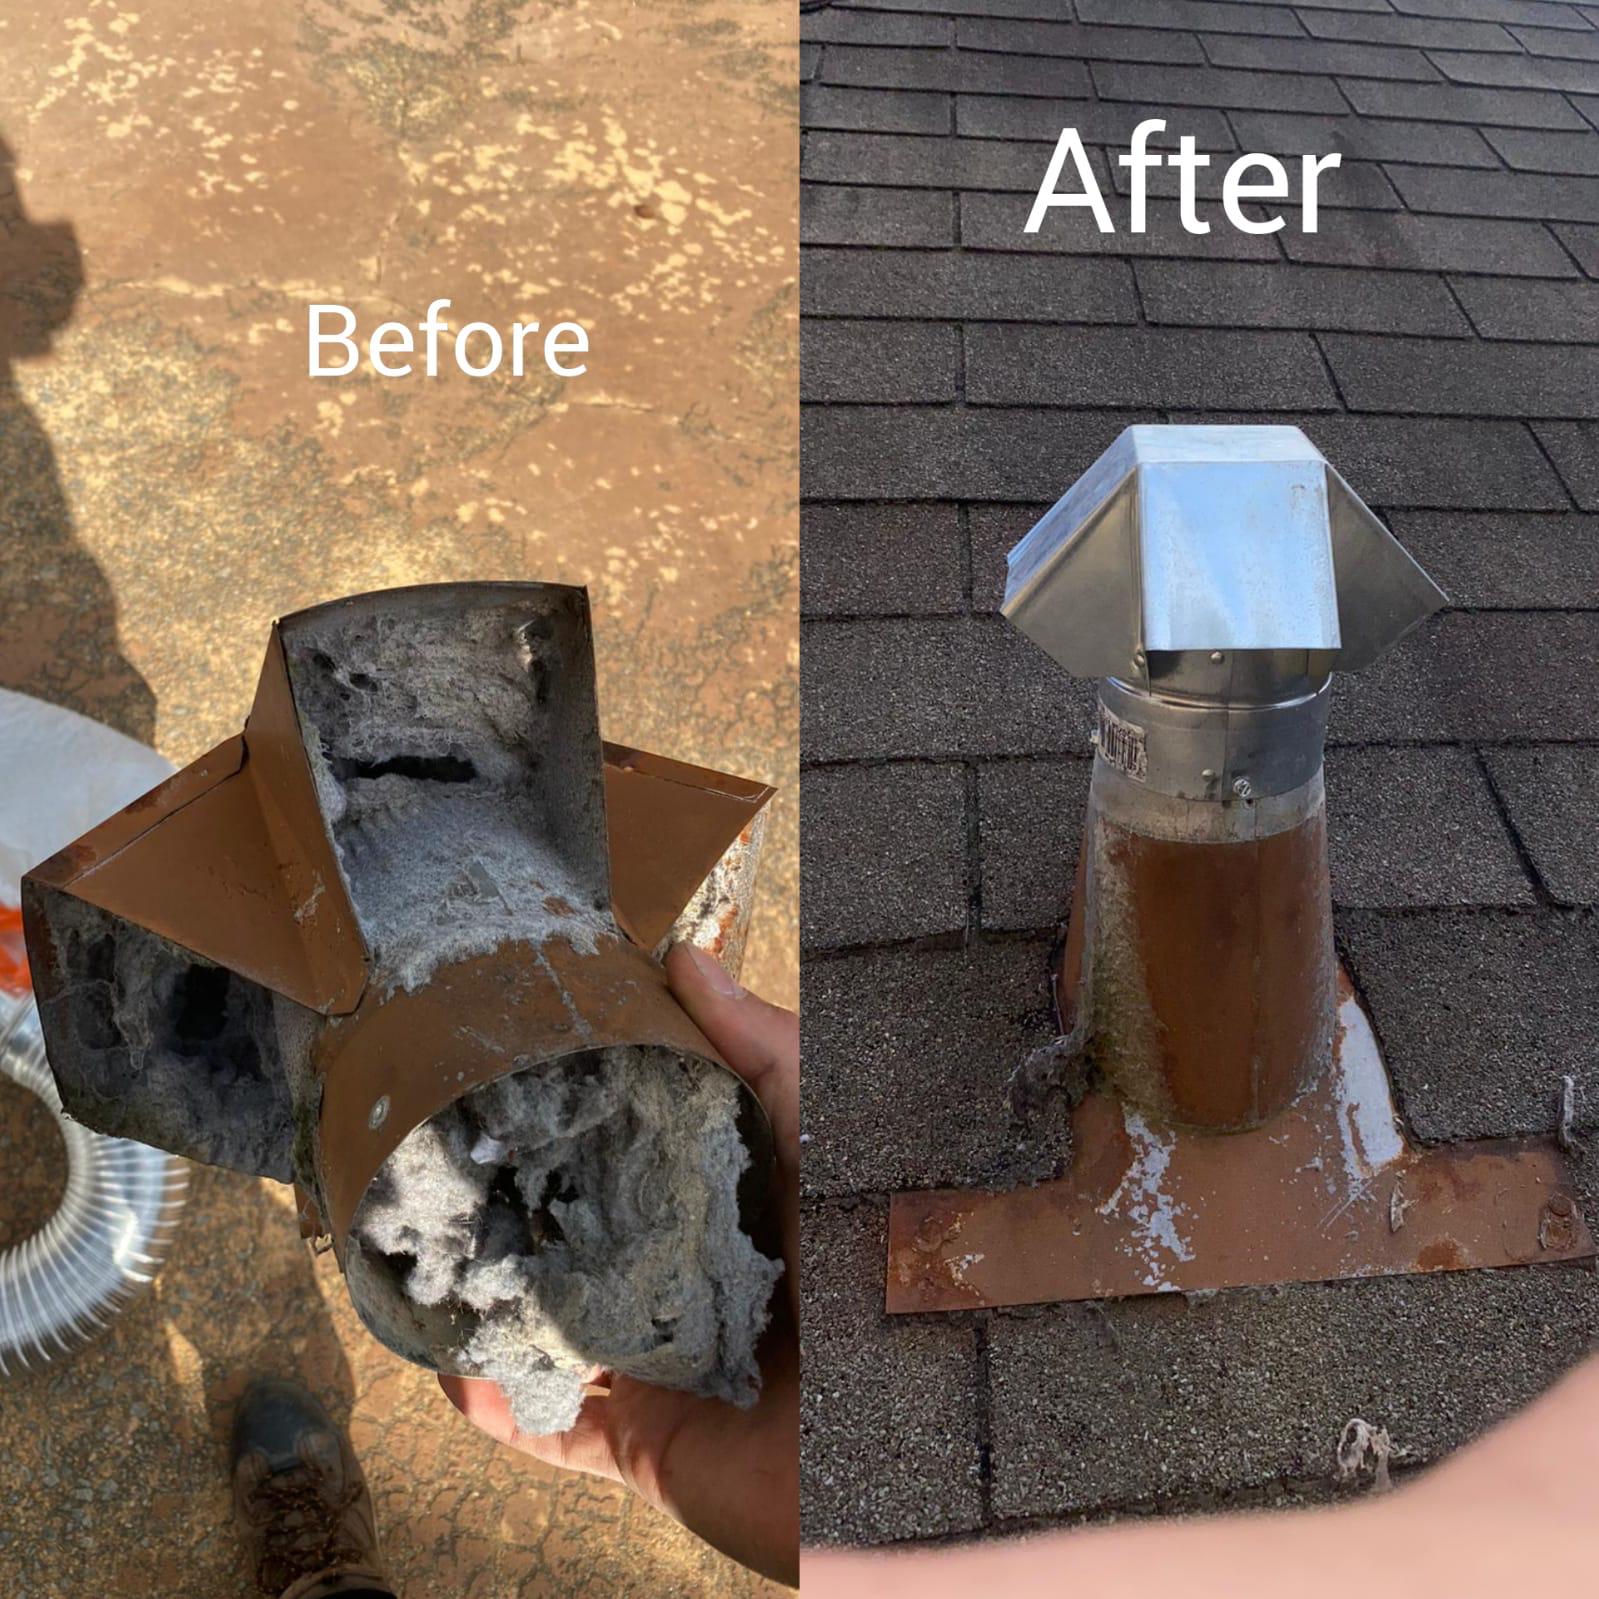 Difference Between Domestic and Commercial Dryer Vent Cleaning